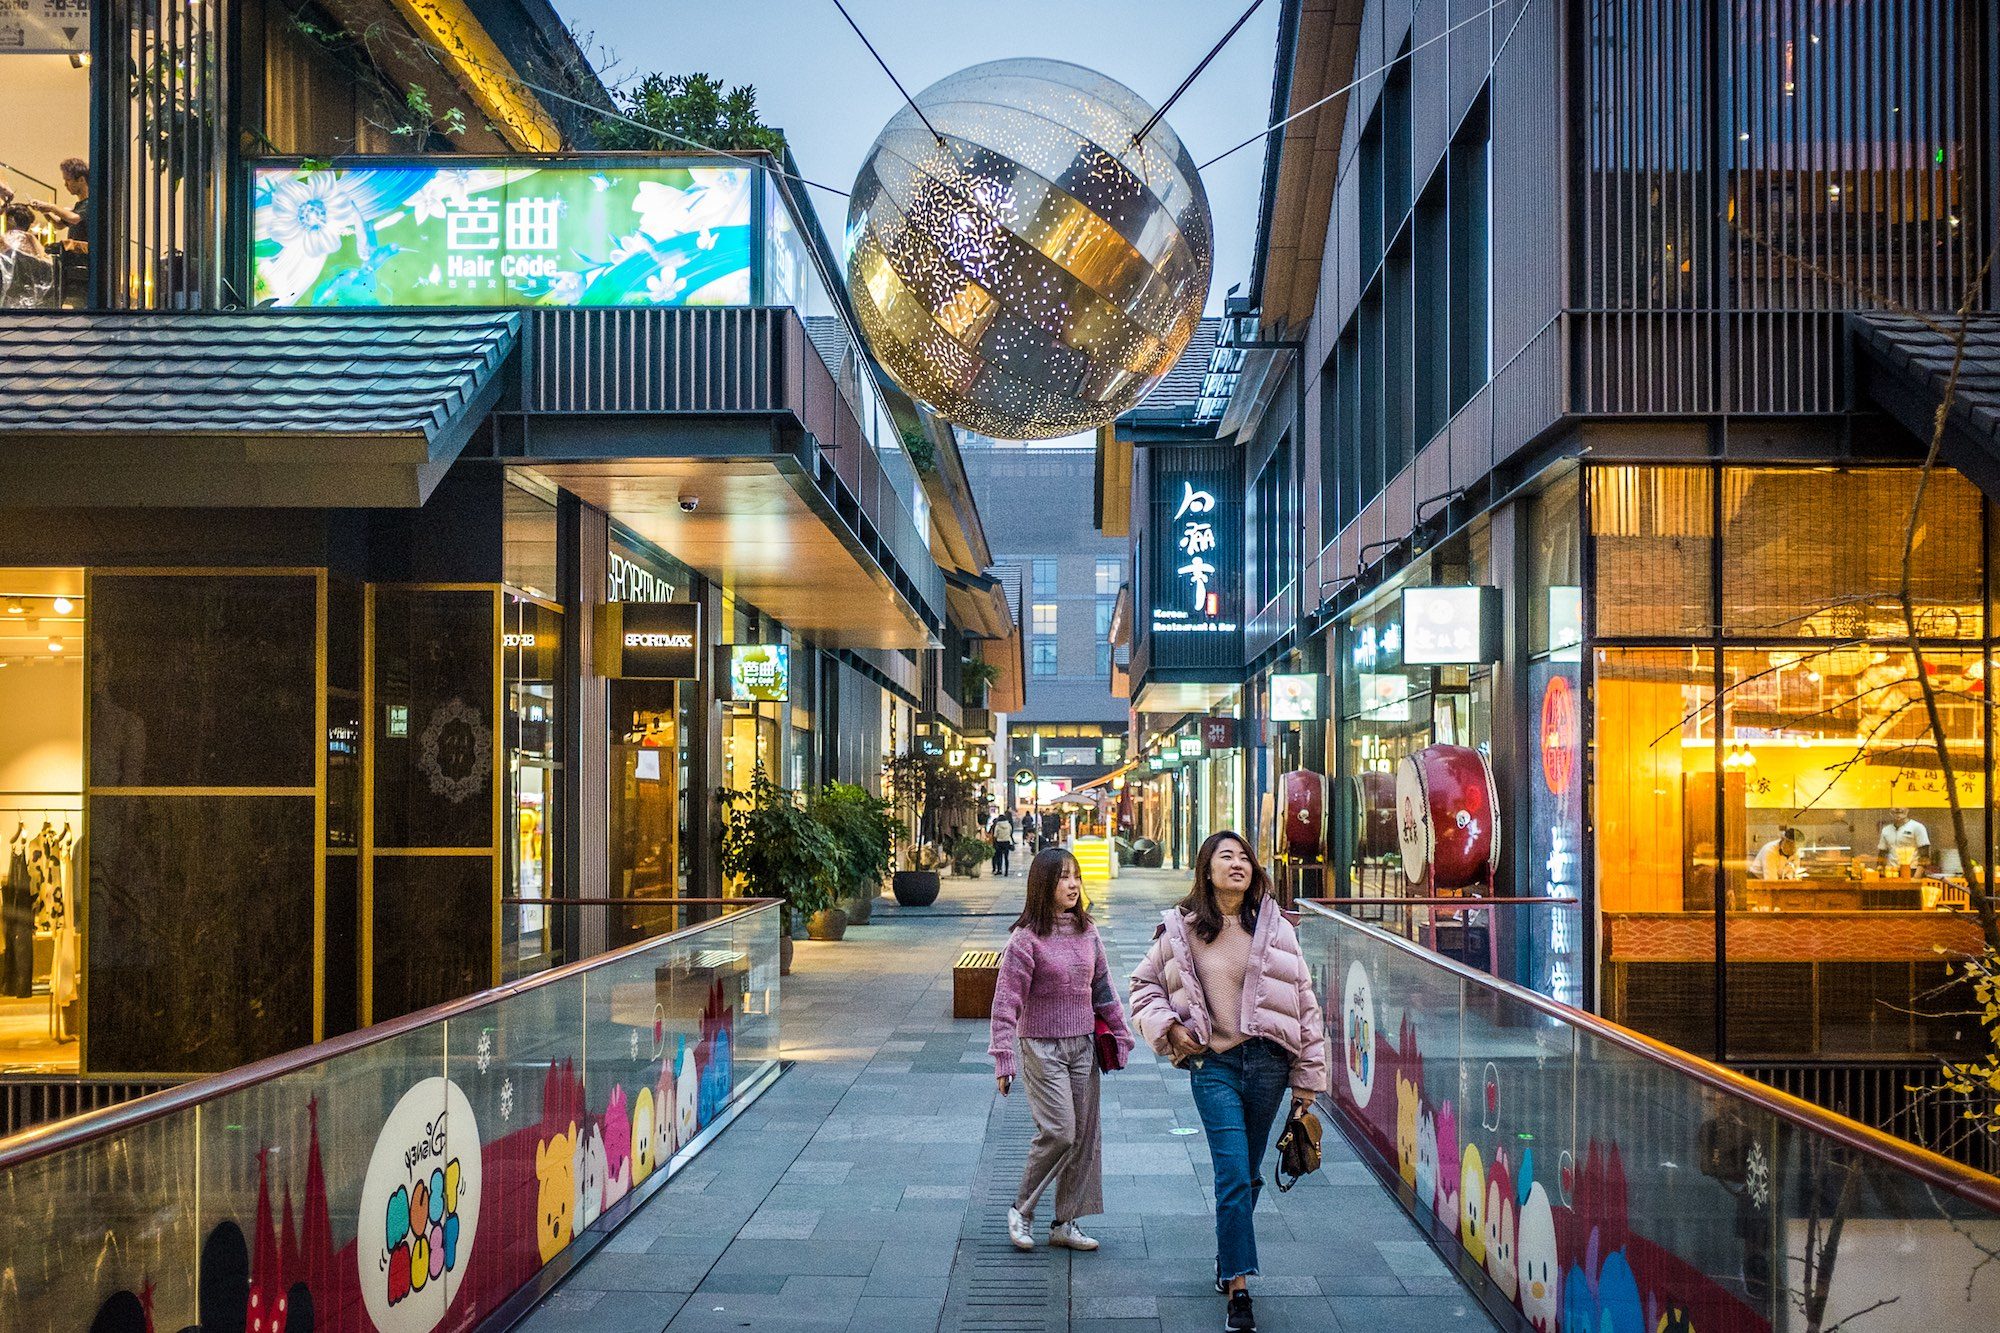 Taikoo Li, Chengdu: The Controversial Trend of Imitating Social Events and  Internet Celebrity Fashion - Archyde